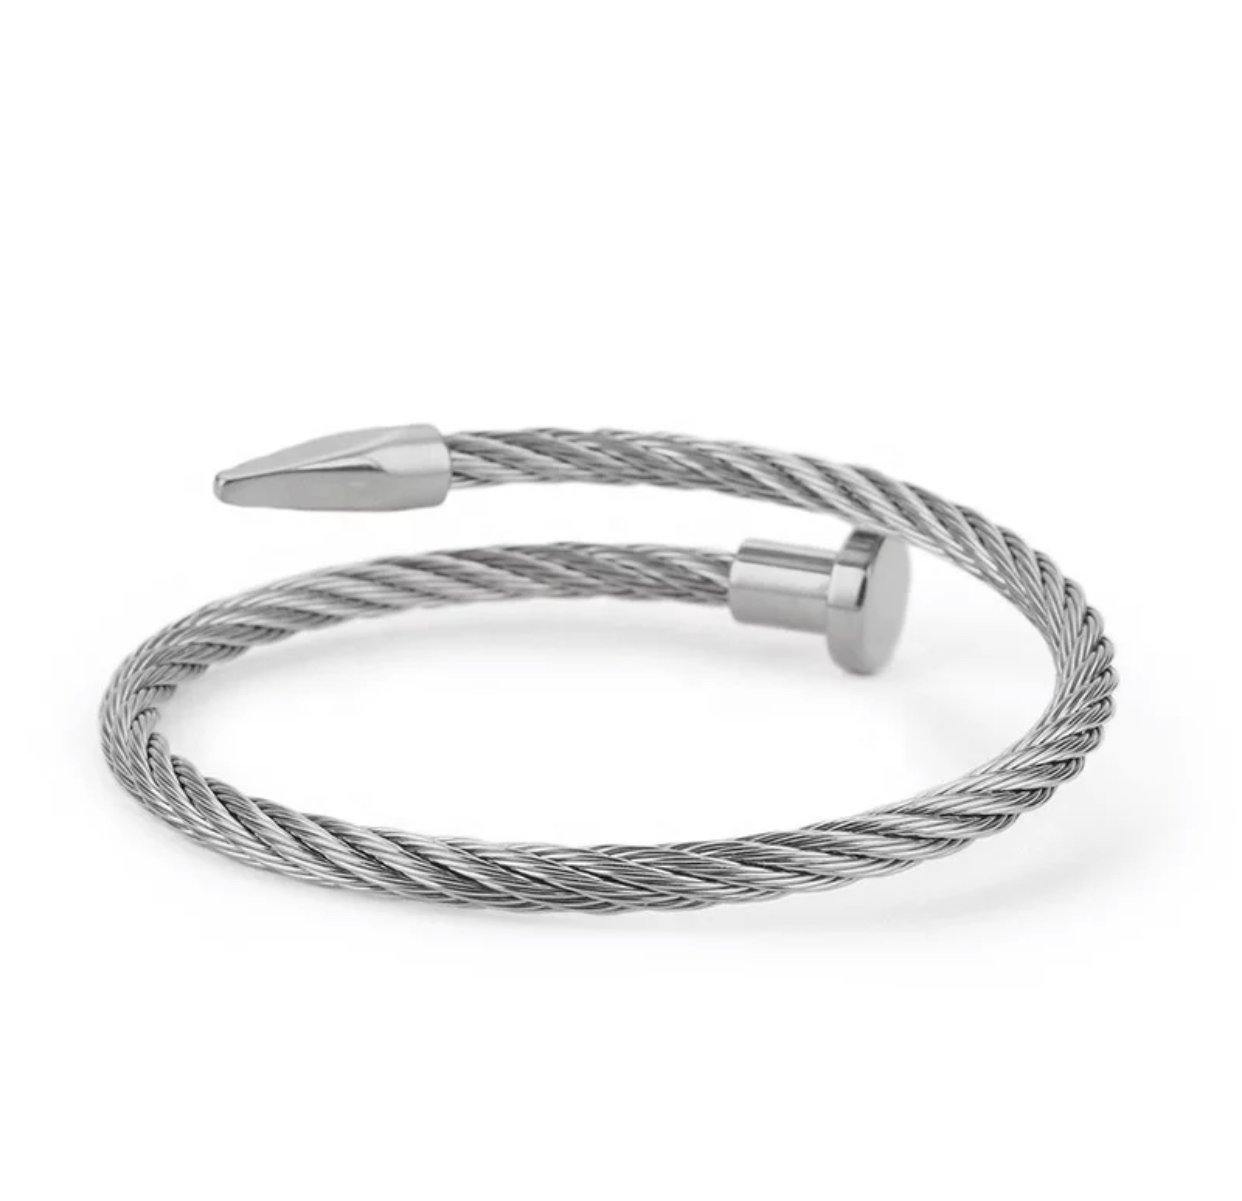 Stainless-Steel-Love-Nail-Bracelet-Women-Jewelry-Nail-Charm-Screw-Cuff-Cable-Wire-Bangle